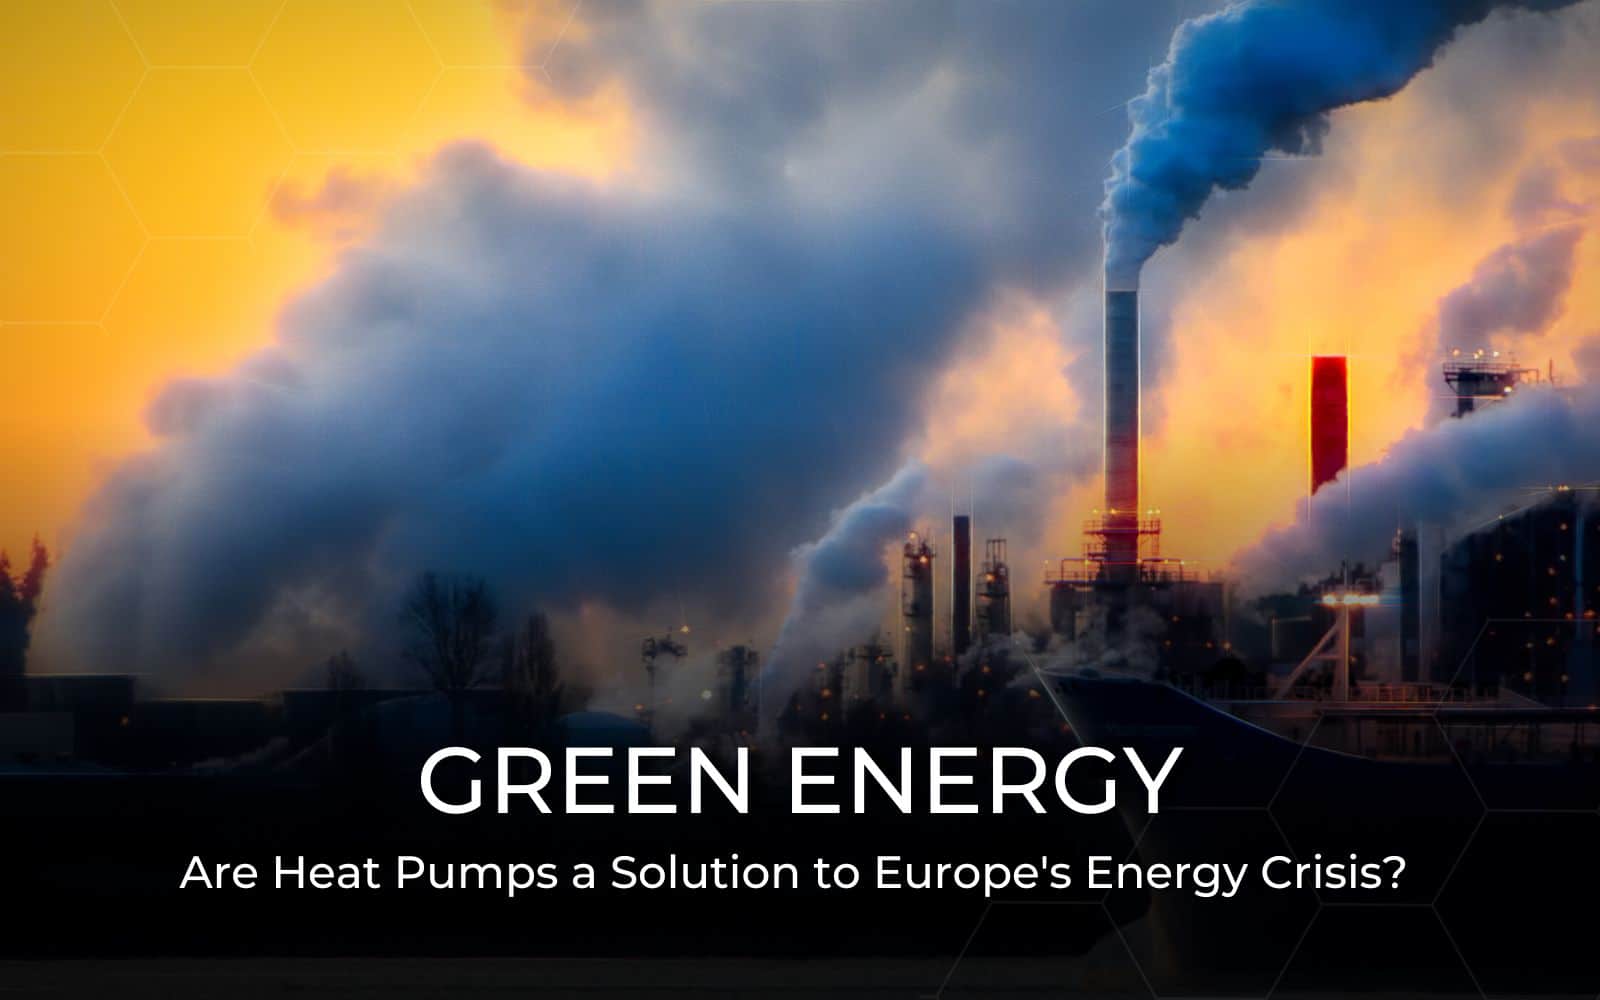 Are Heat Pumps a Solution to Europe's Energy Crisis?